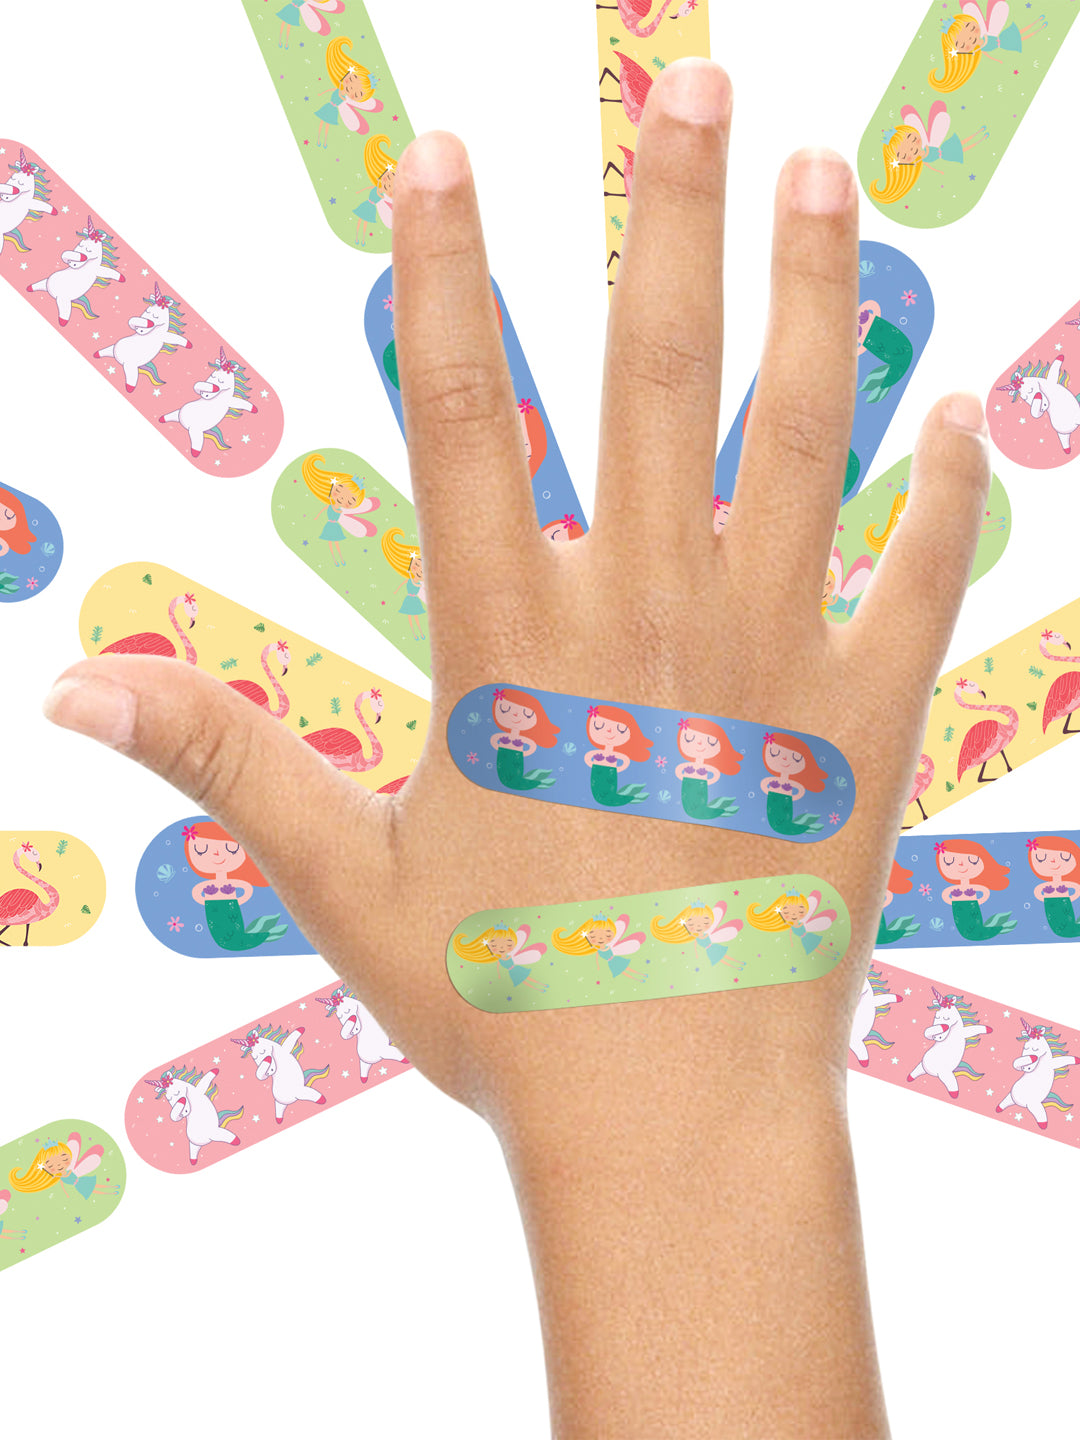 Ouchie Non-Toxic Printed Bandages Jumbo Pack (80 Pack) - Lime Green, Pink, Blue & Lavender